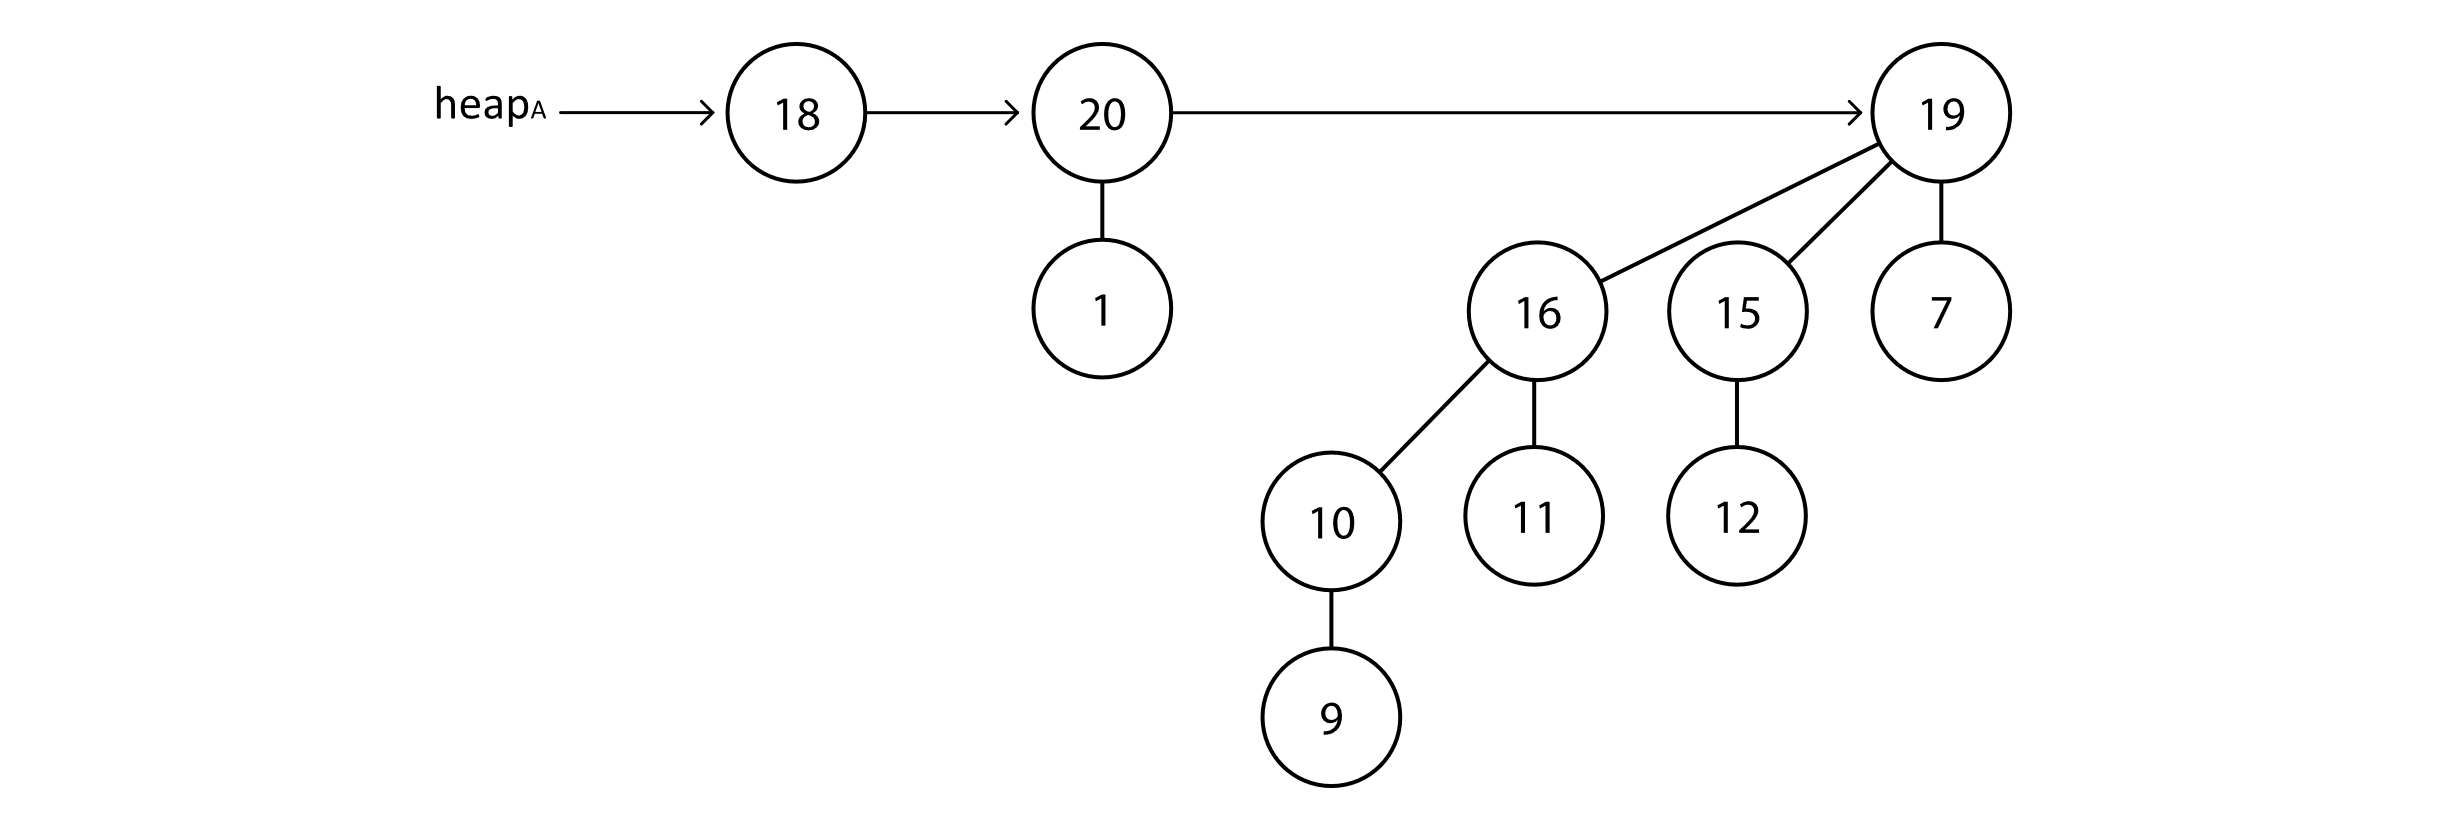 Exmaple binomial heap with degree 0, degree 1, and degree 3 trees.